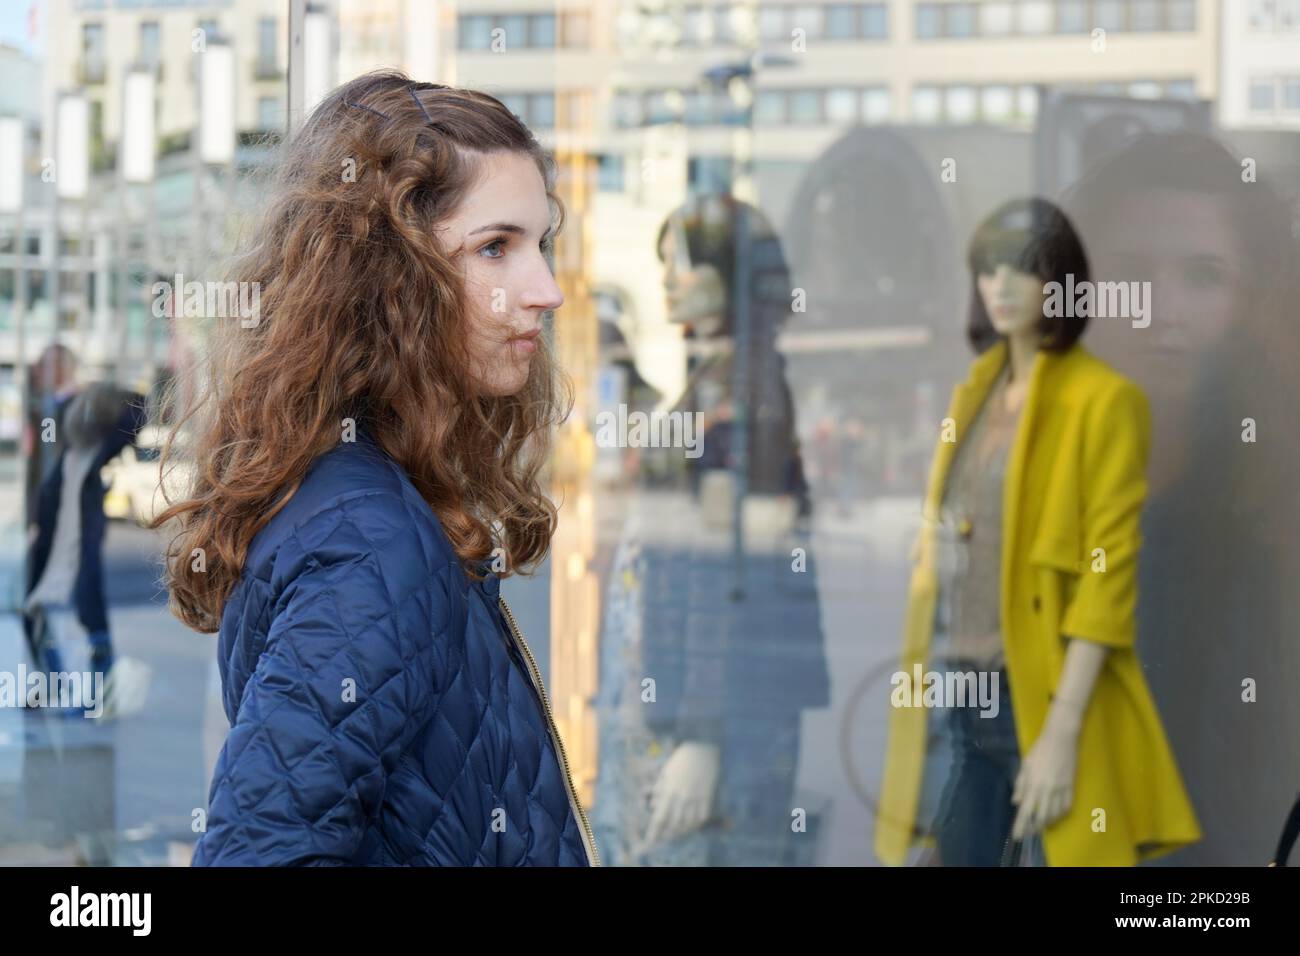 young woman looking at fashion display in shop window Stock Photo